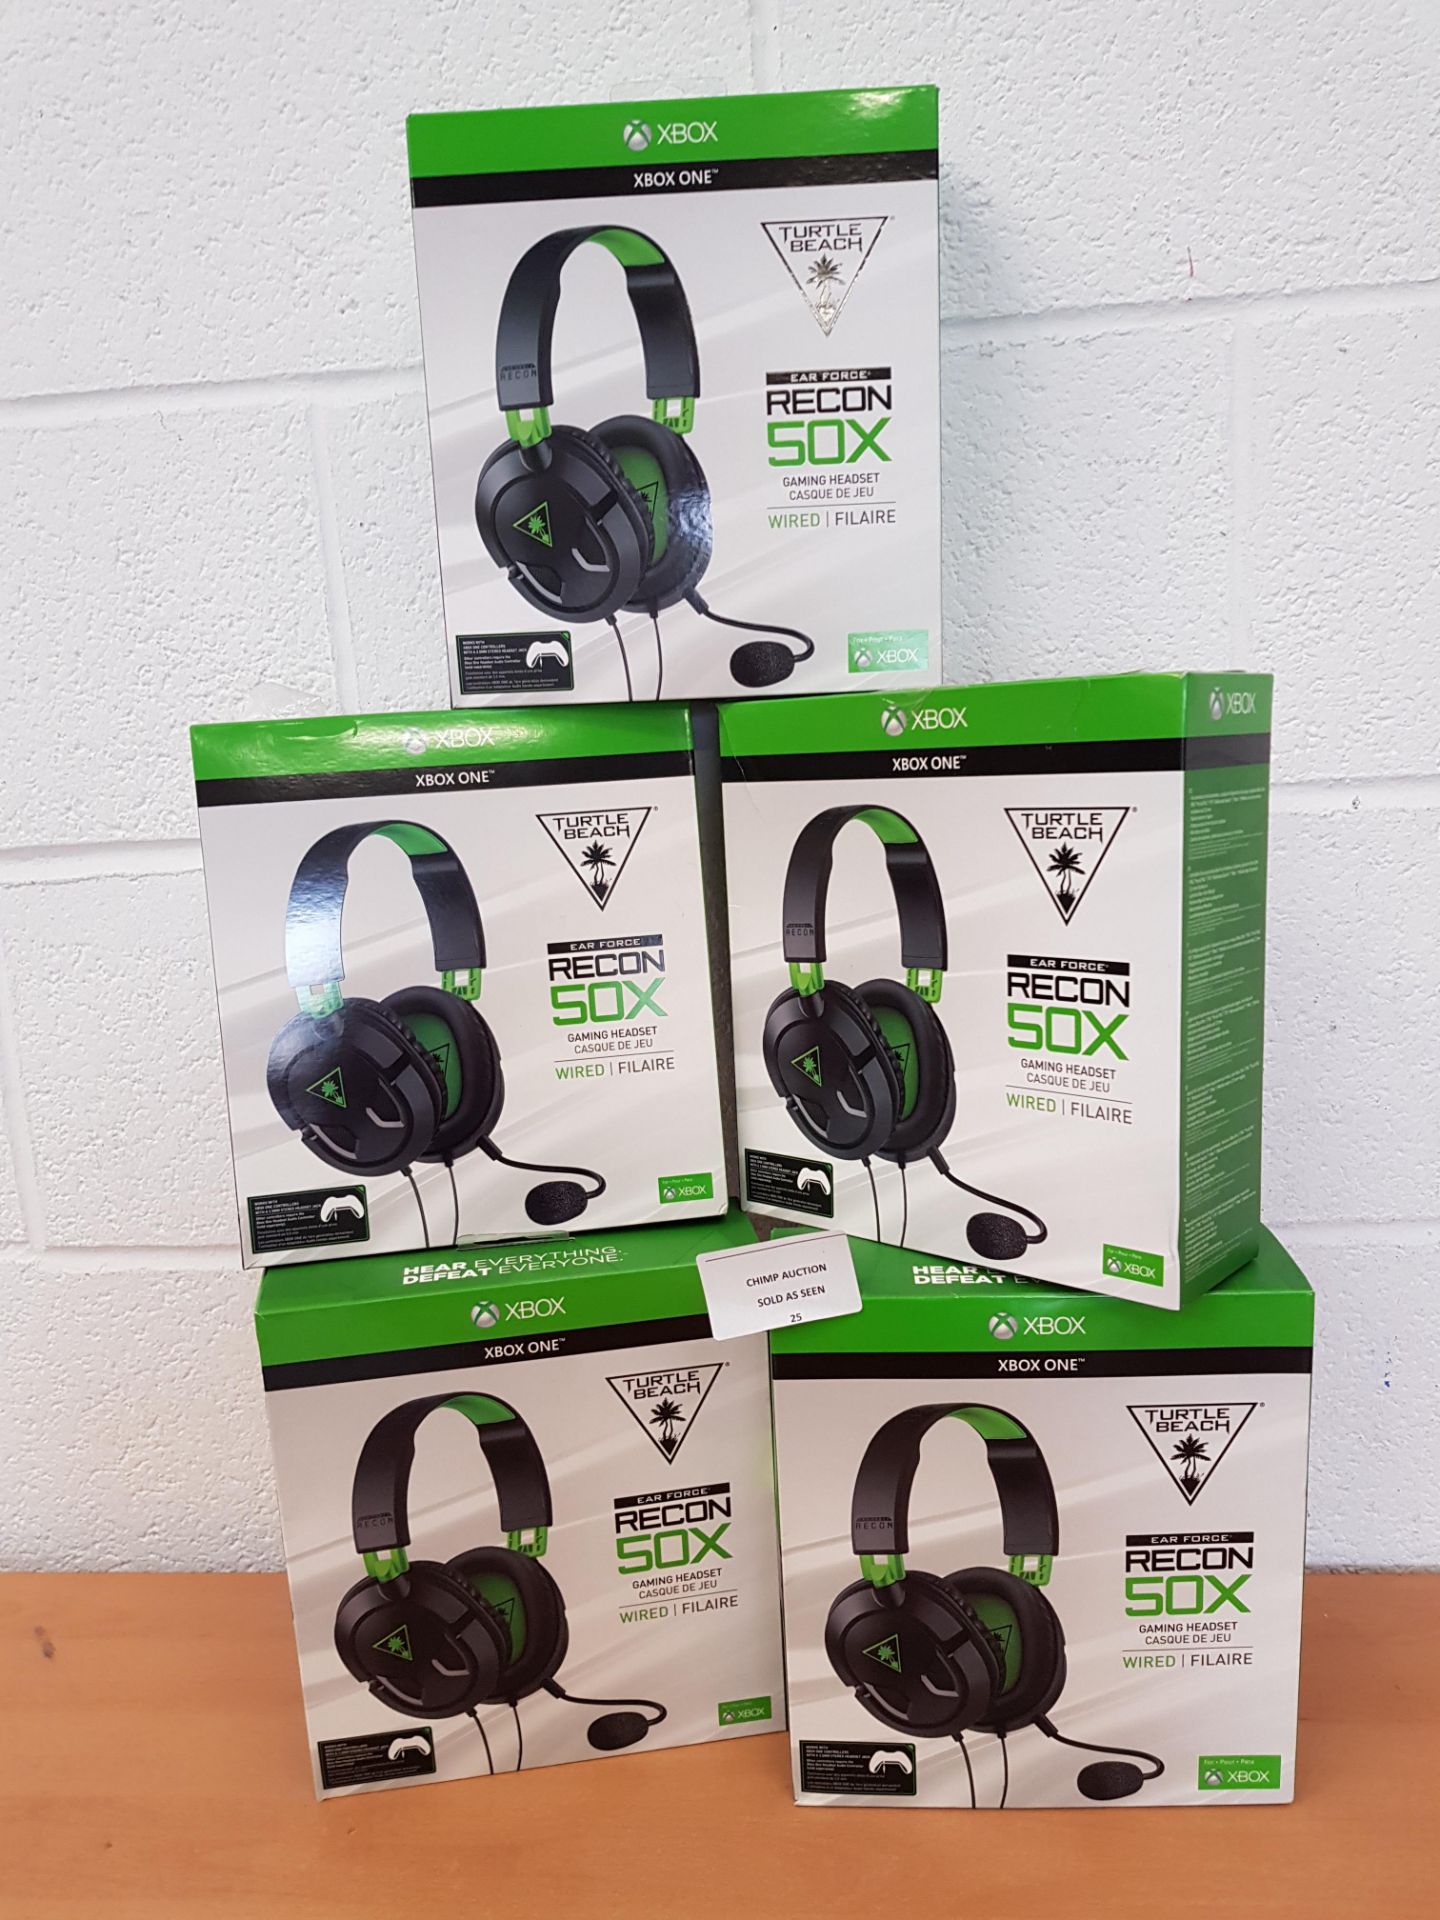 Joblot of 5X TurtleBeach Recon 50X Xbox One gaming headsets RRP £300.